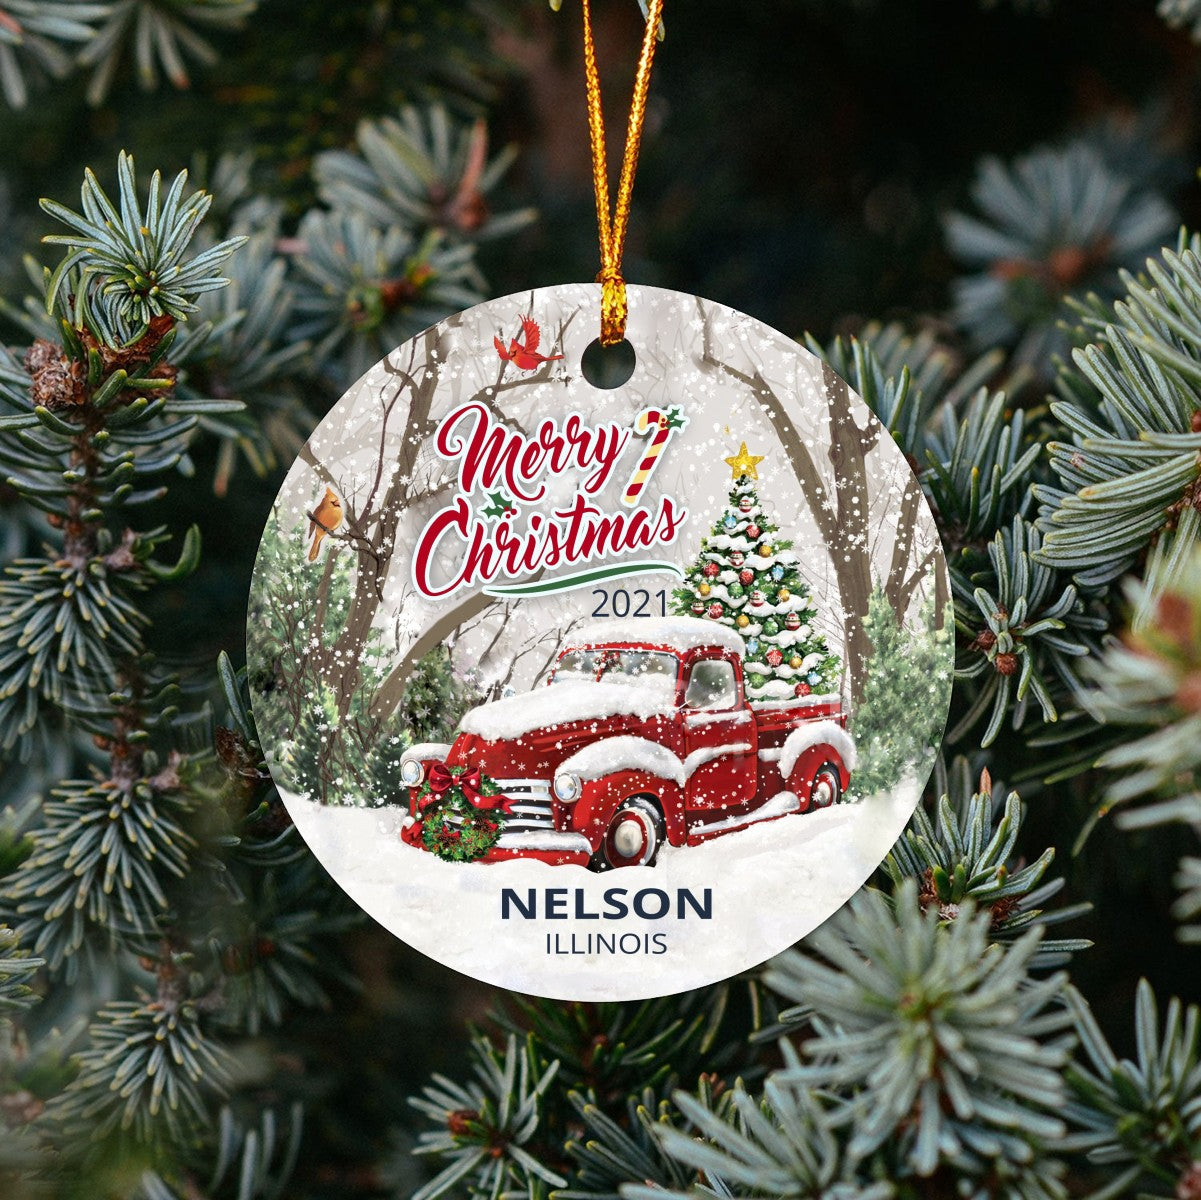 Christmas Tree Ornaments Nelson - Ornament With Name City, State Nelson Illinois IL Ornament - Red Truck Xmas Ornaments 3'' Plastic Gift For Family, Friend And Housewarming